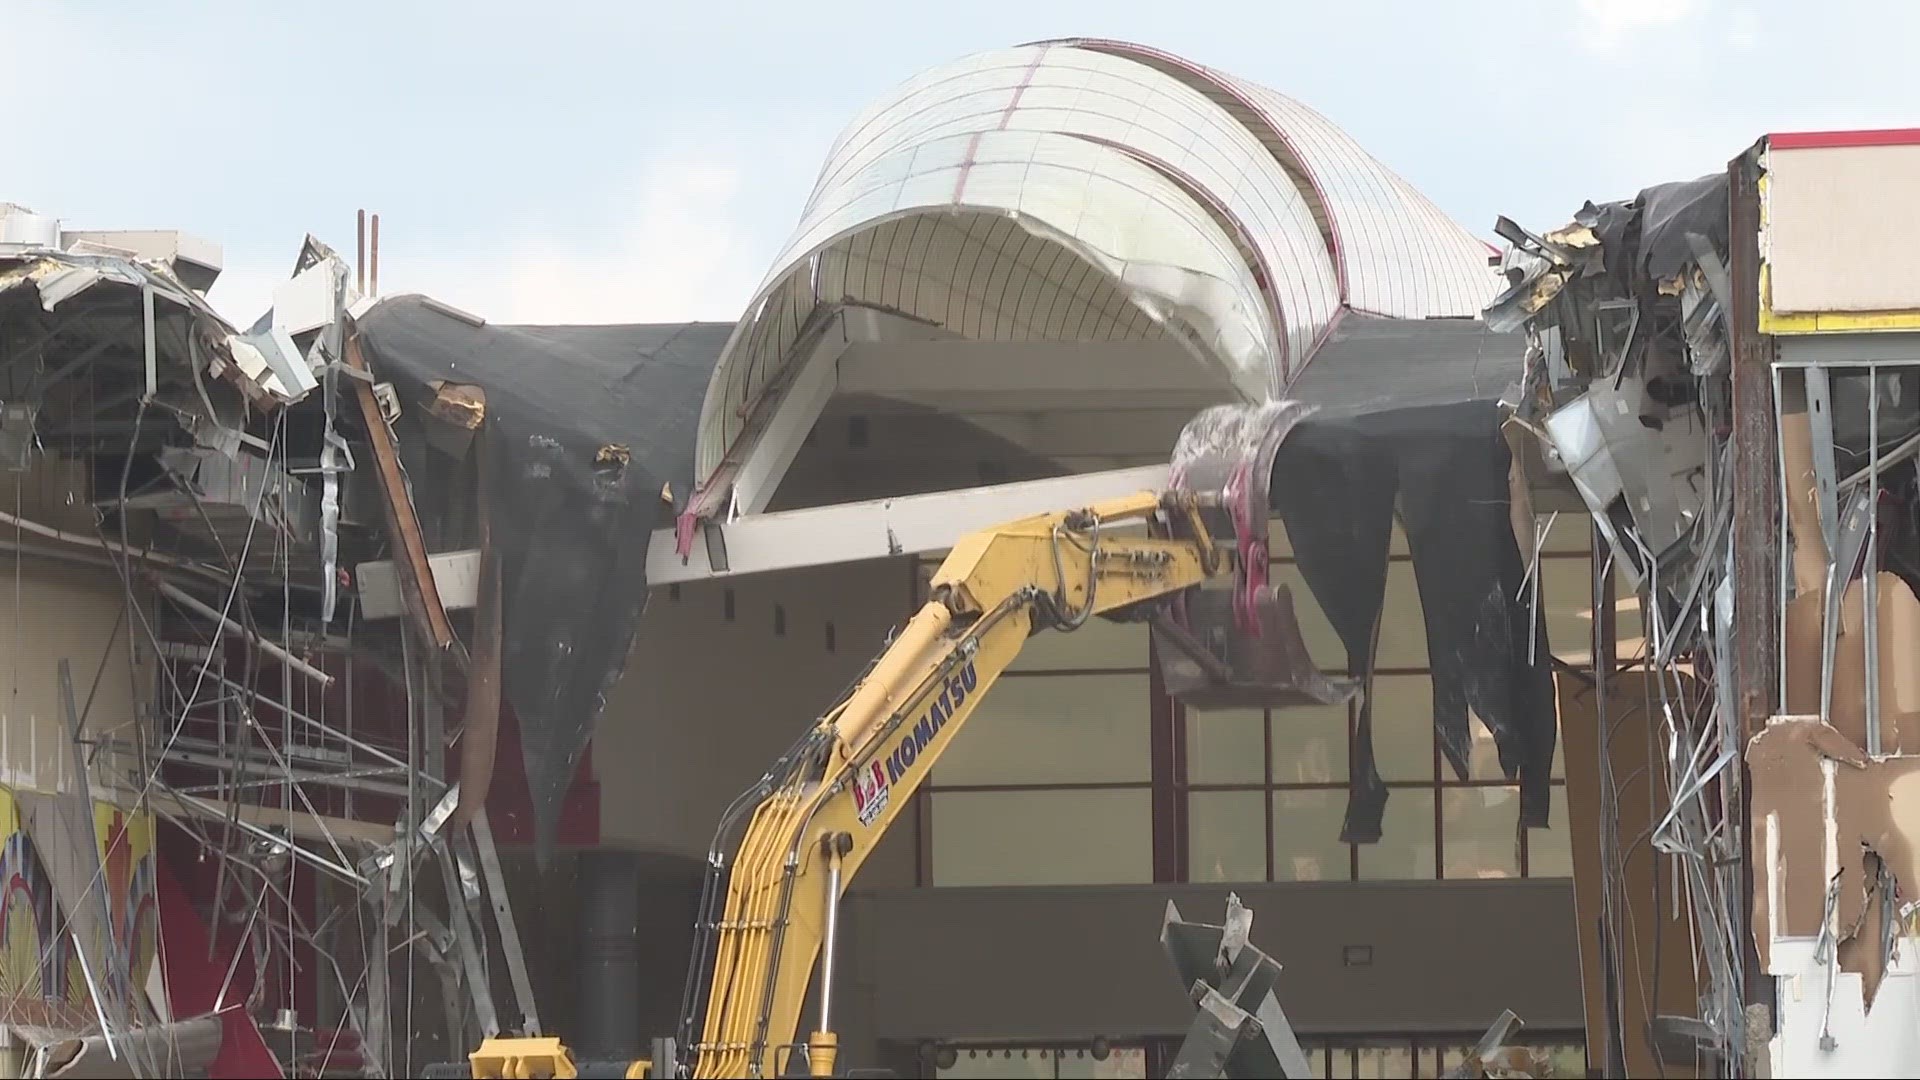 The demolition of the mall will clear the way for the Belle Oaks Marketplace construction project.